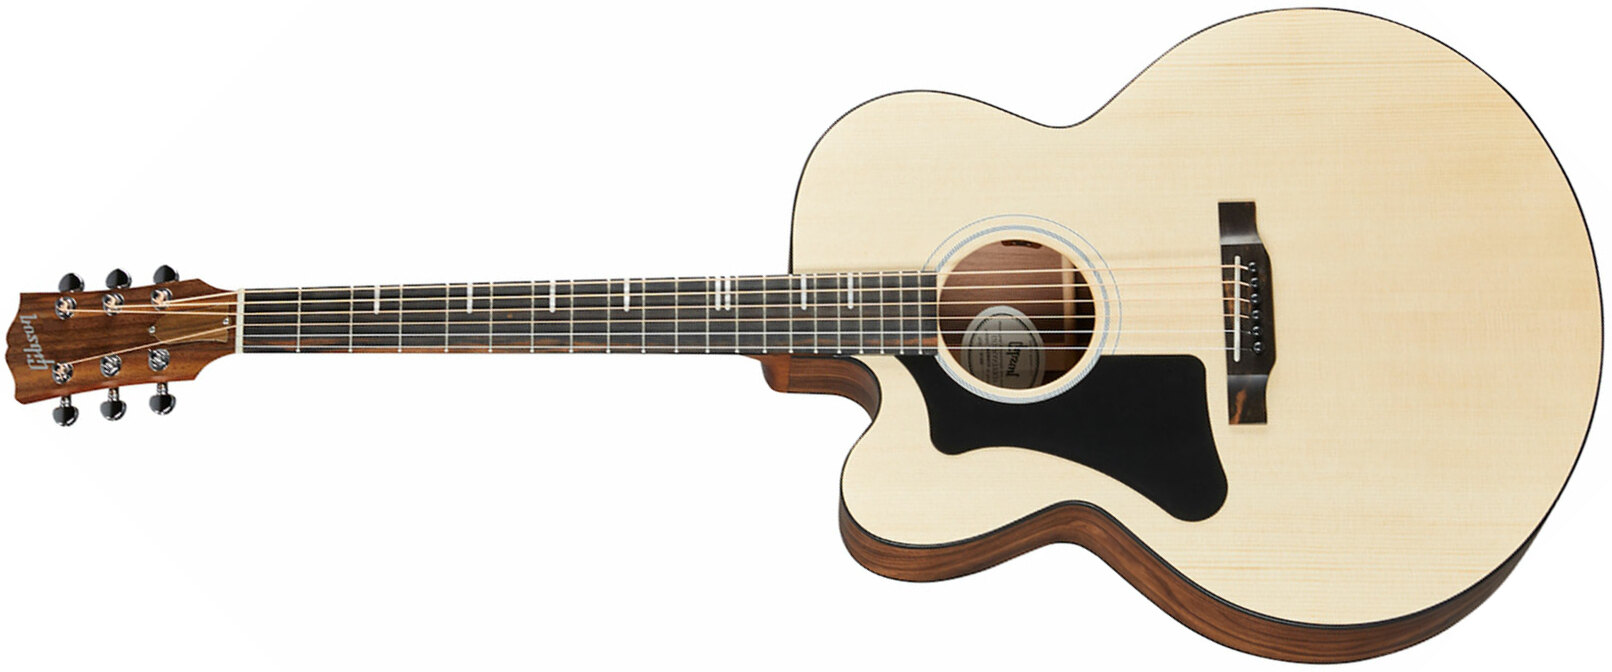 Gibson G-200 Ec Lh Jumbo Modern Gaucher Cw Epicea Noyer Wal Eb - Natural Satin - Acoustic guitar & electro - Main picture